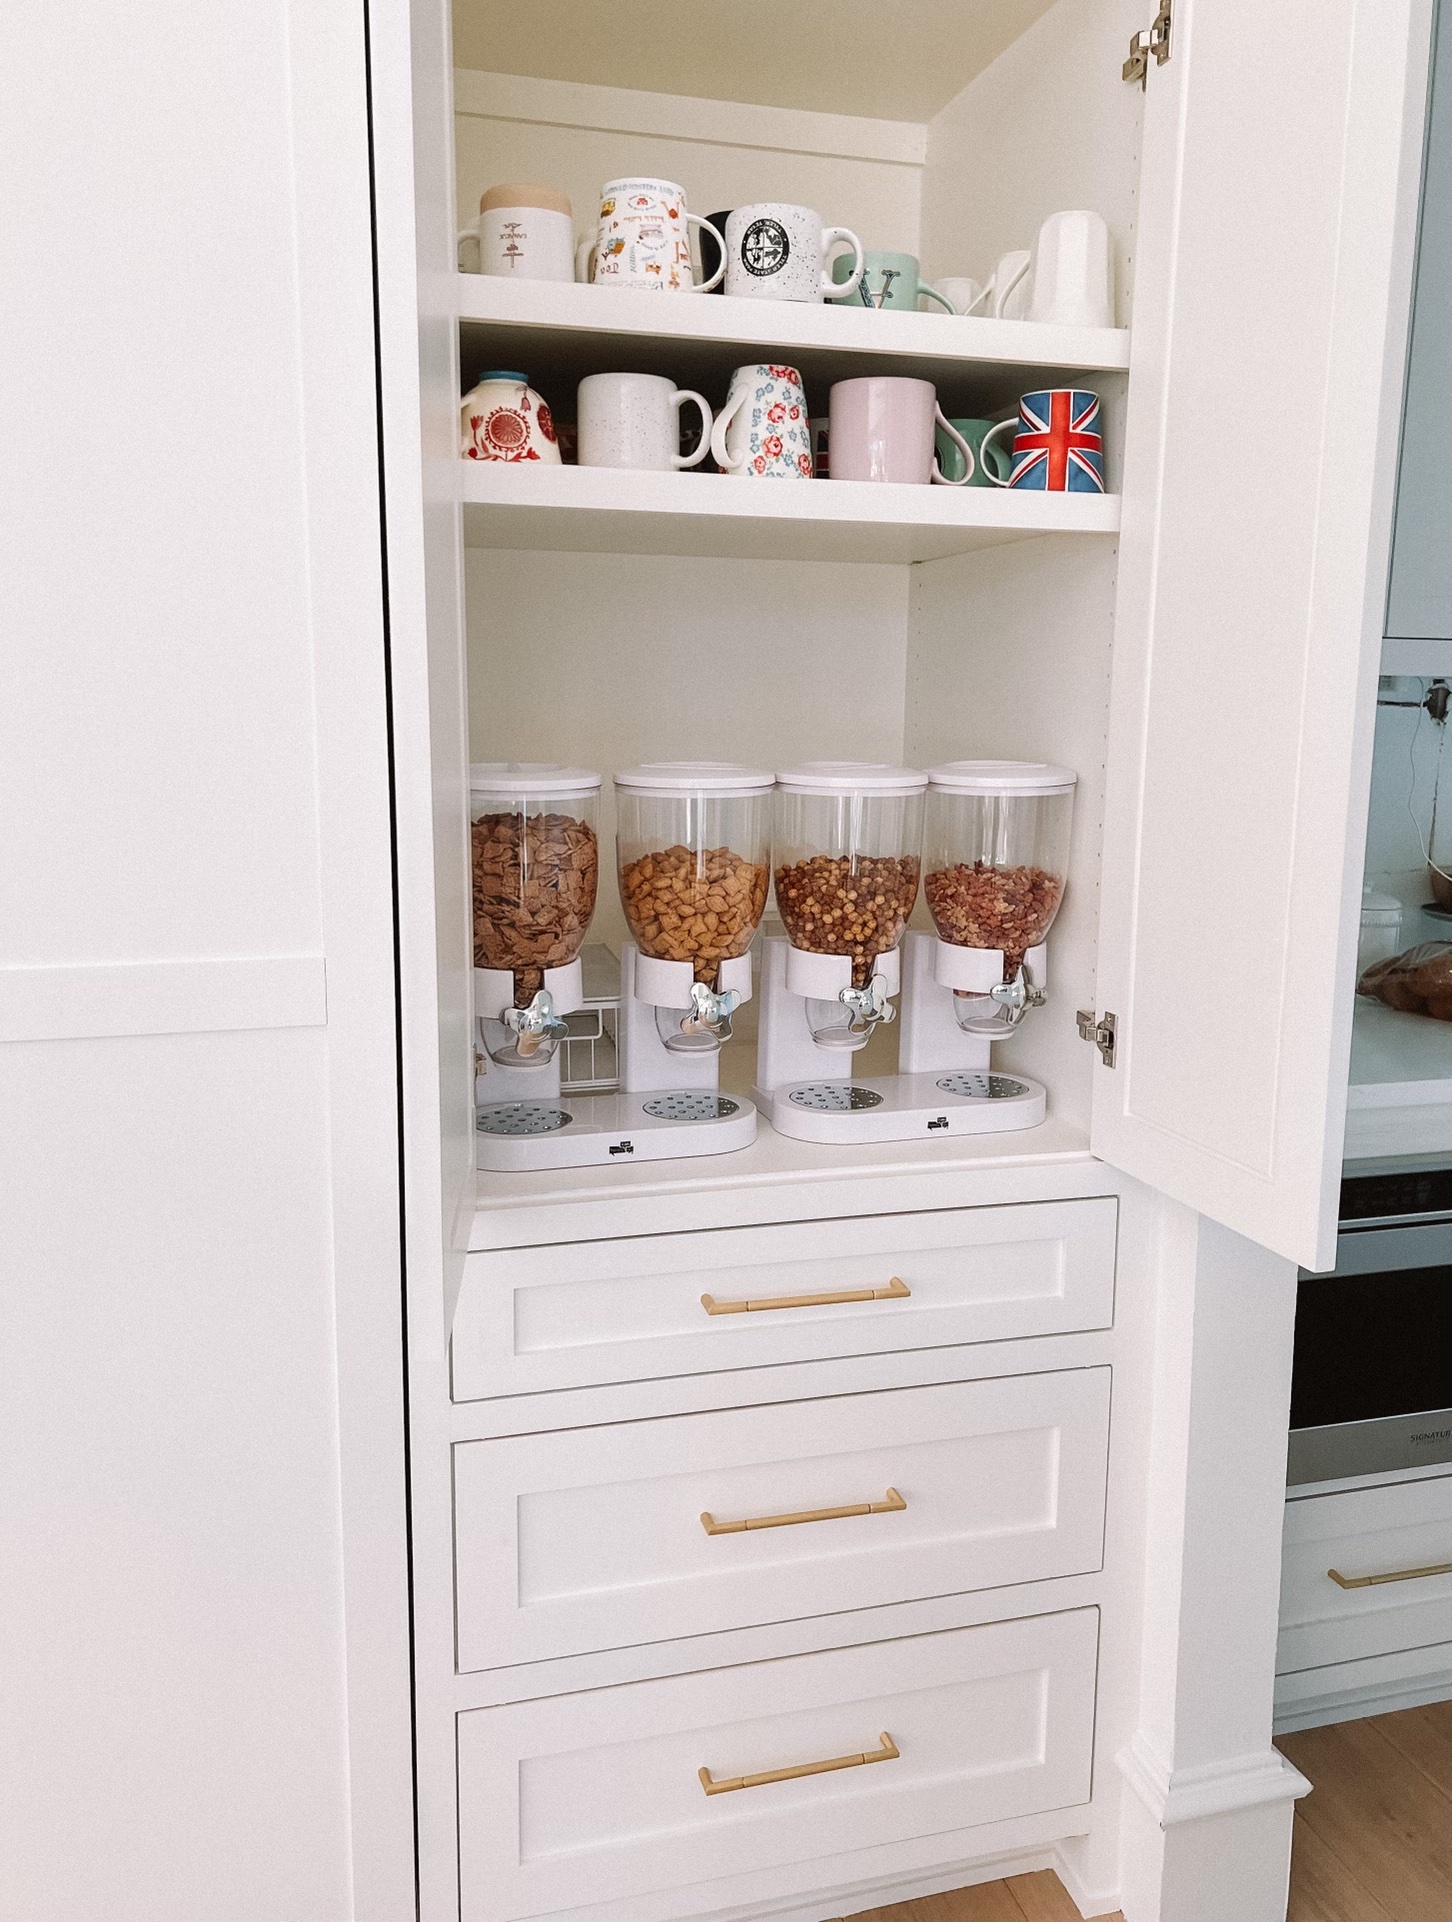 cereal bar in kitchen